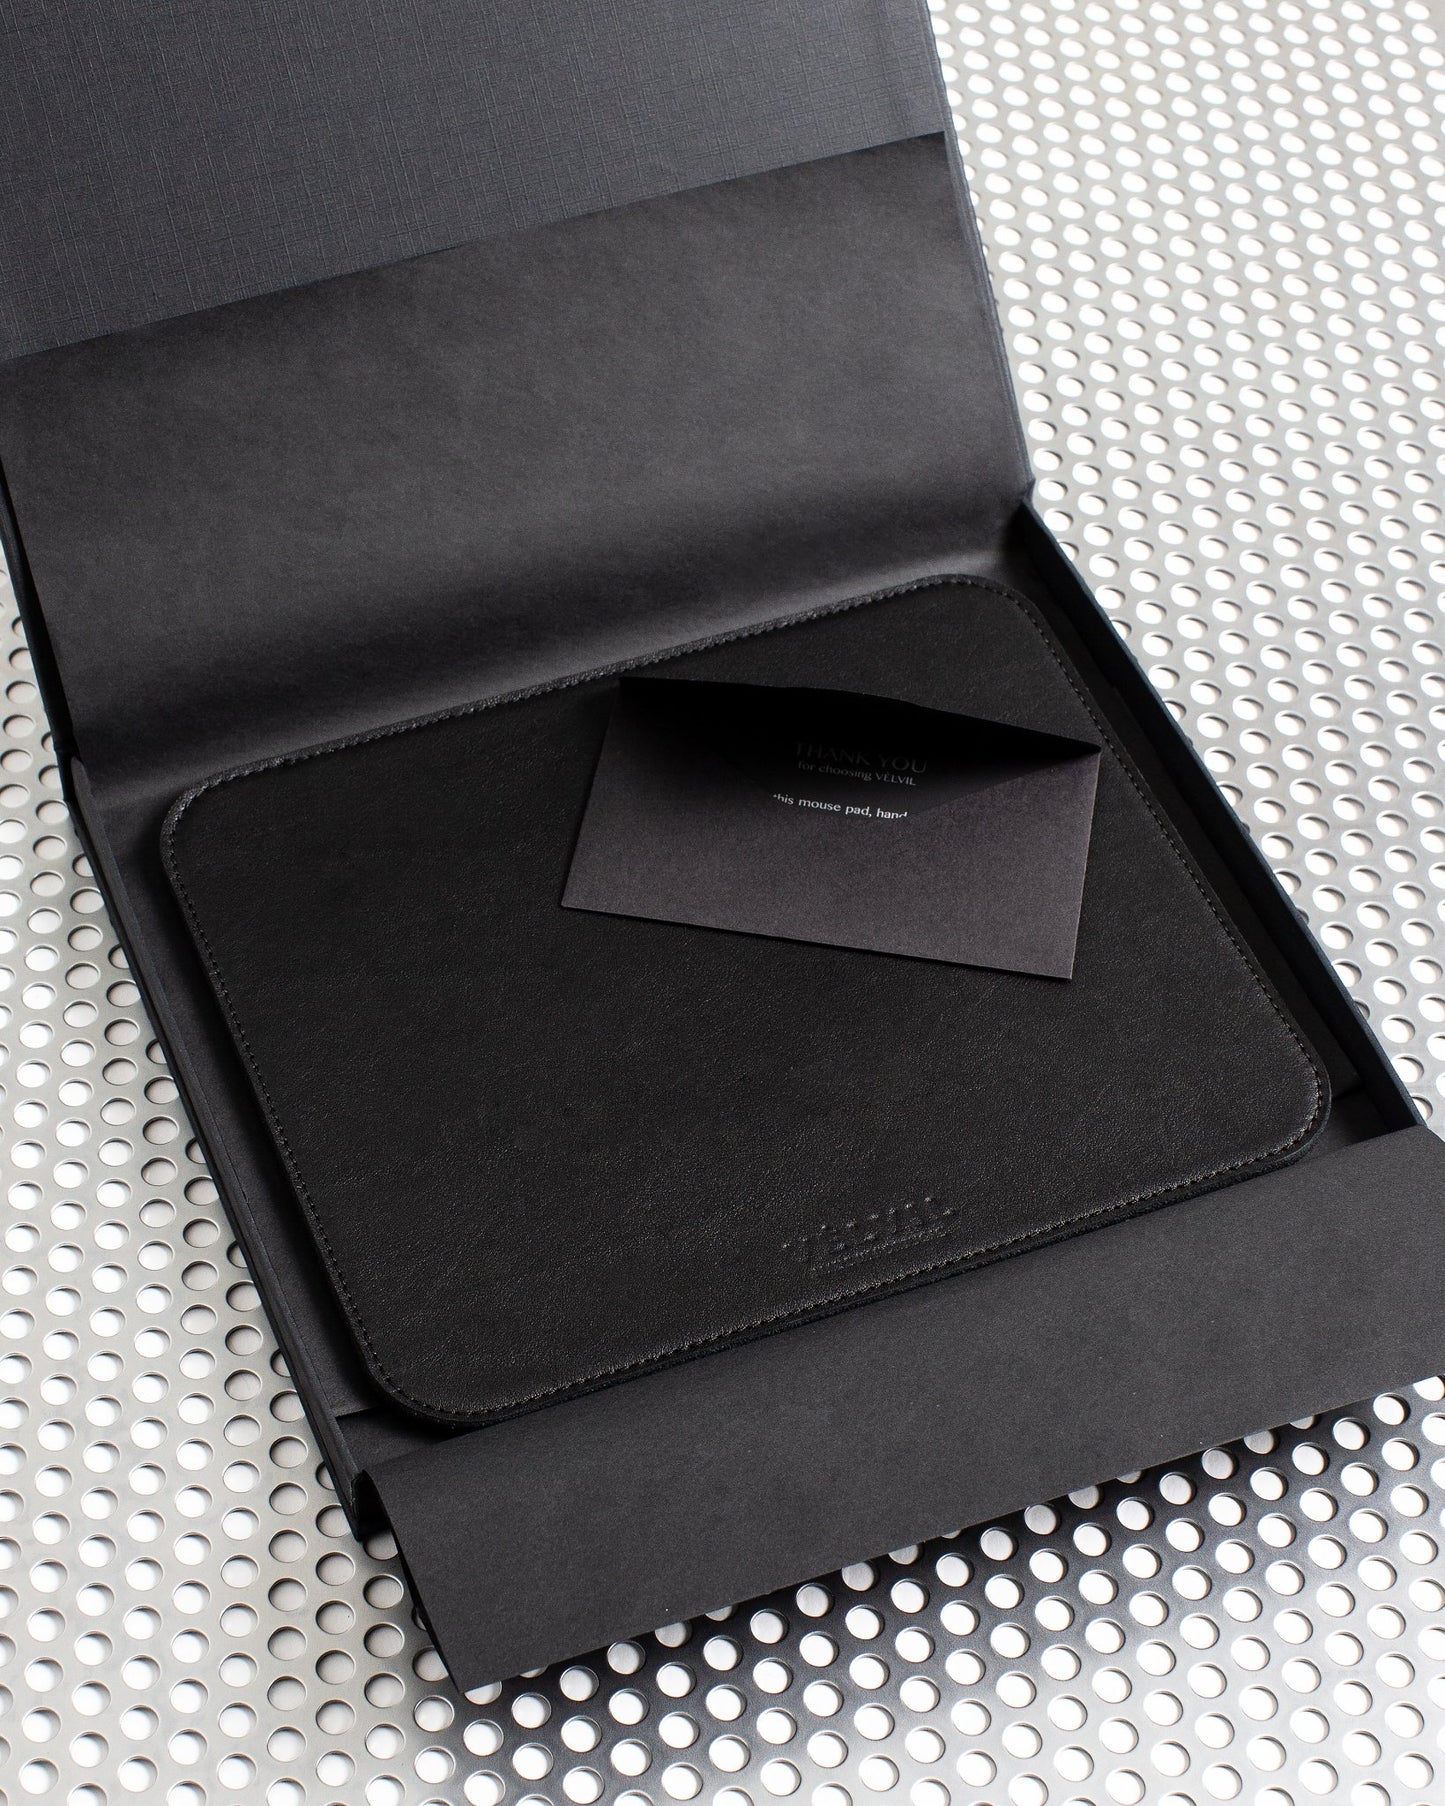 Black leather mouse pad with premium gift box